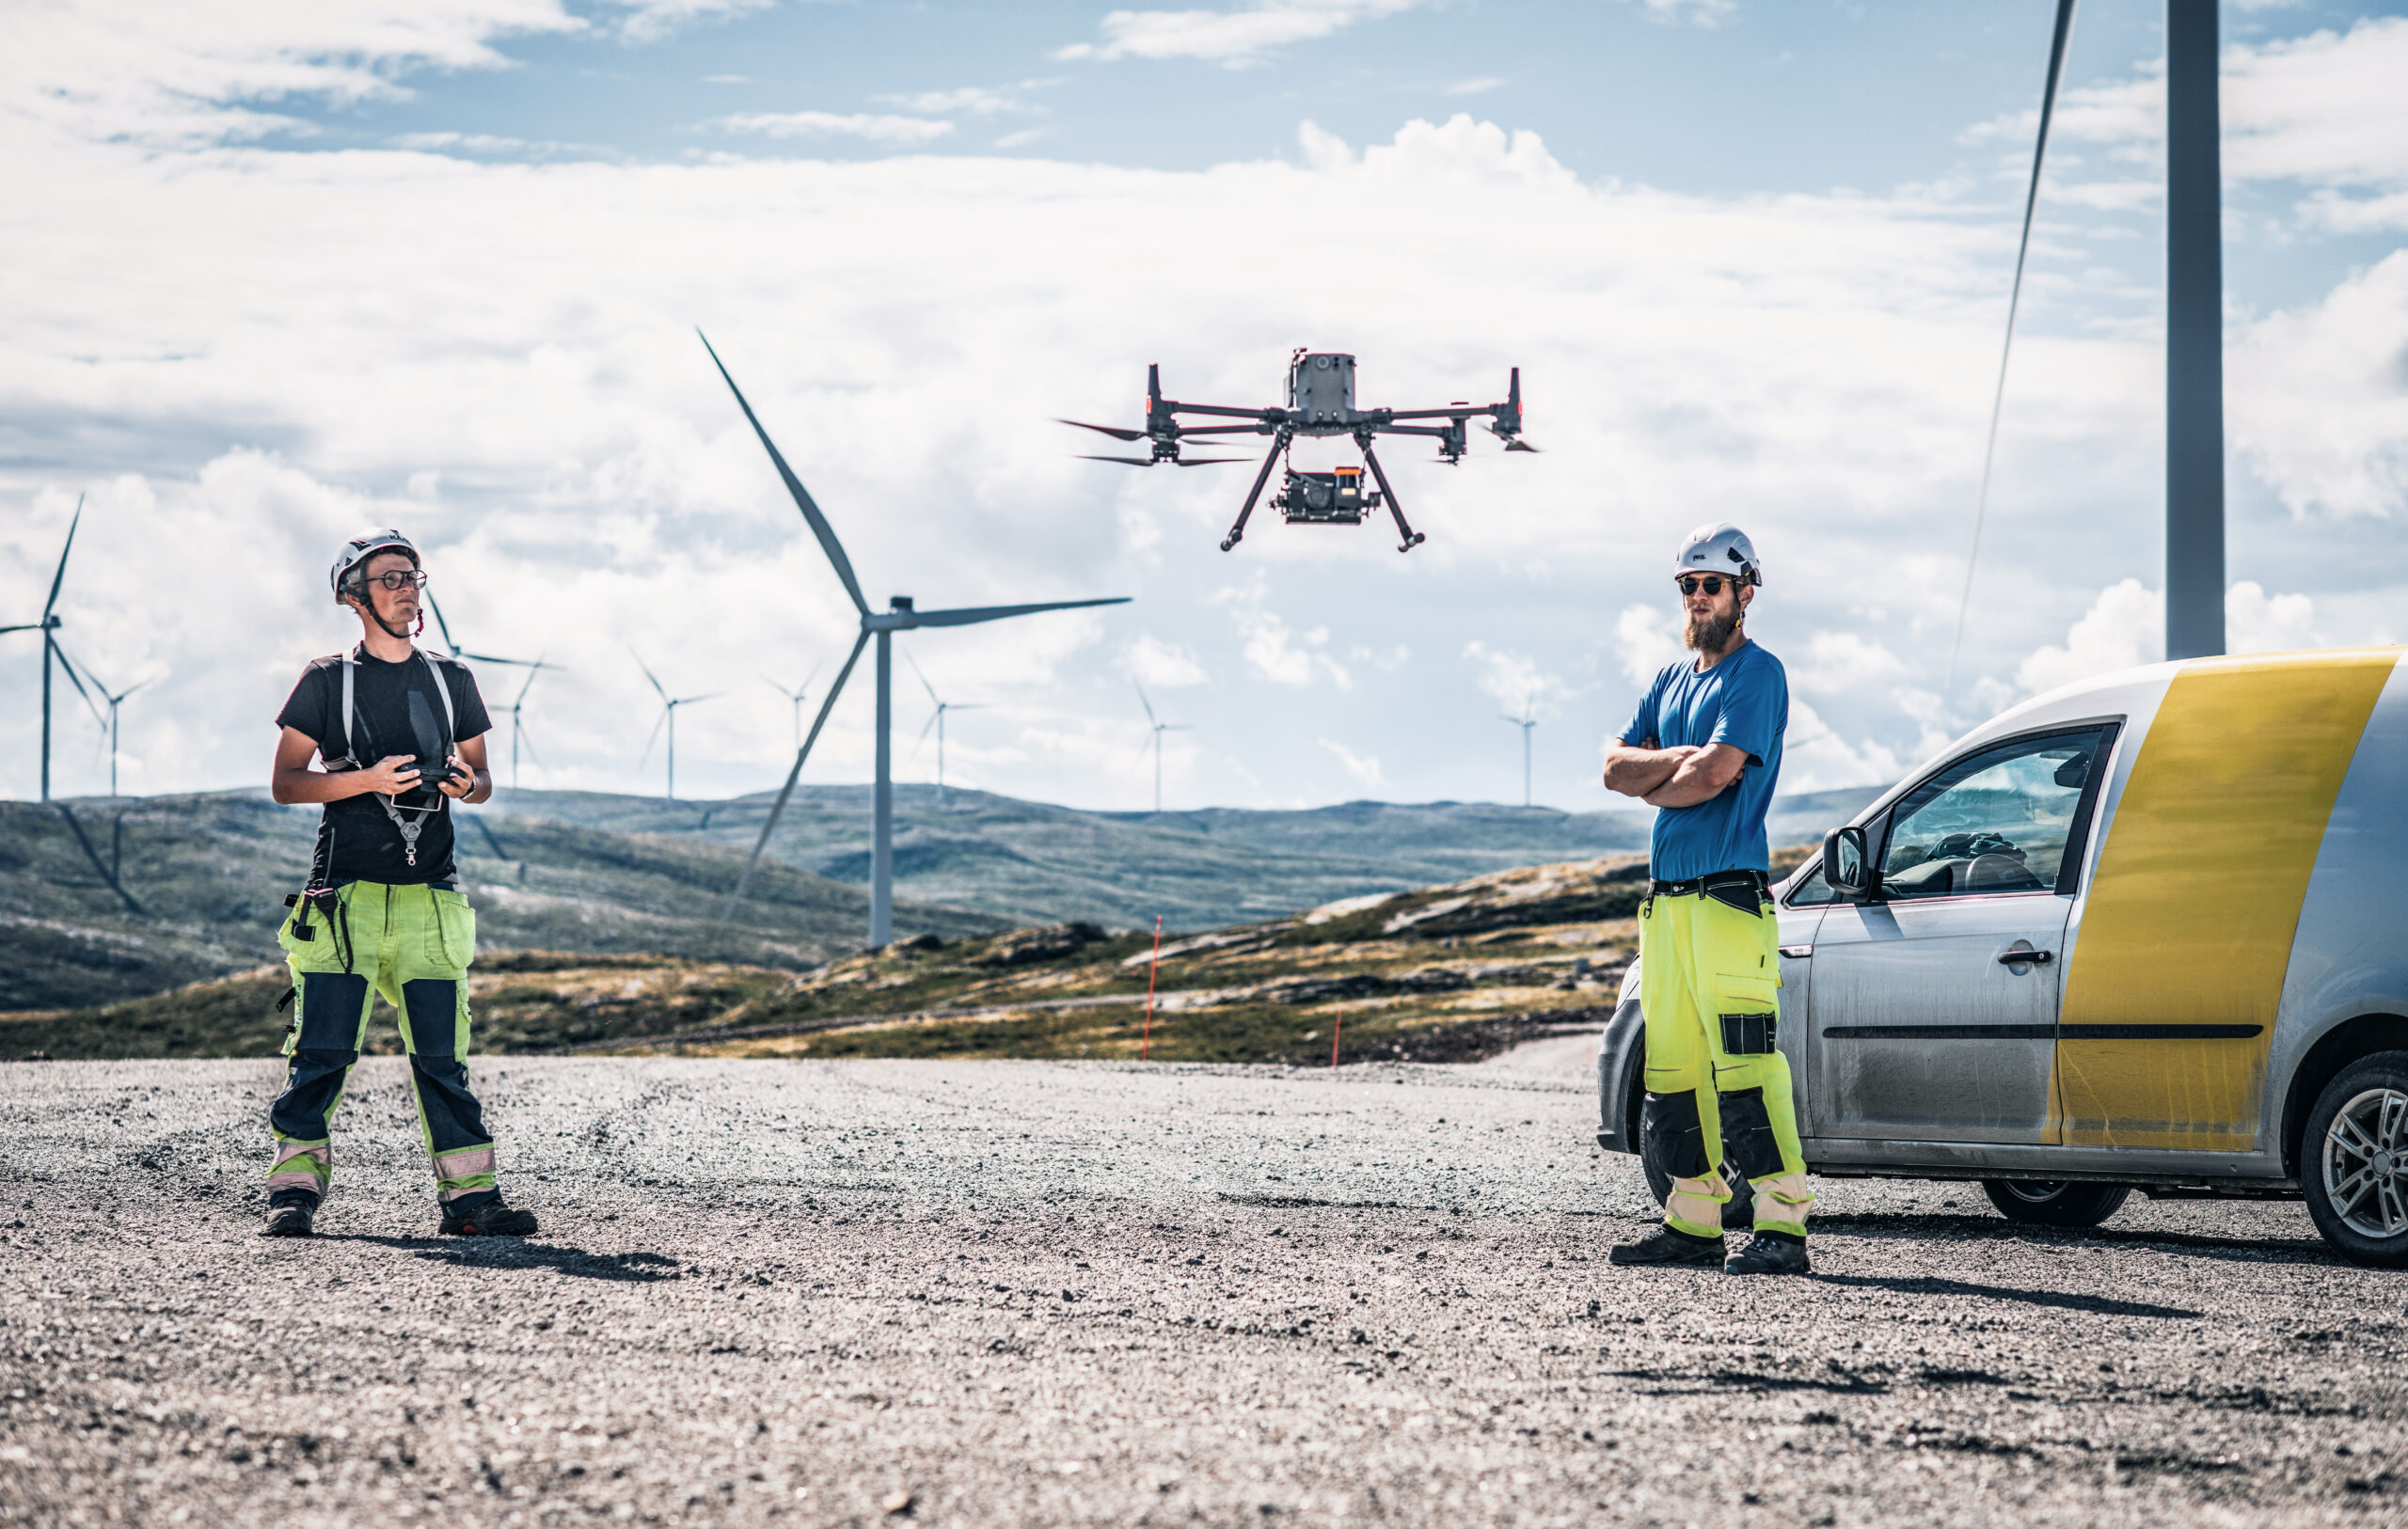 Pilots for drone inspection of wind farms